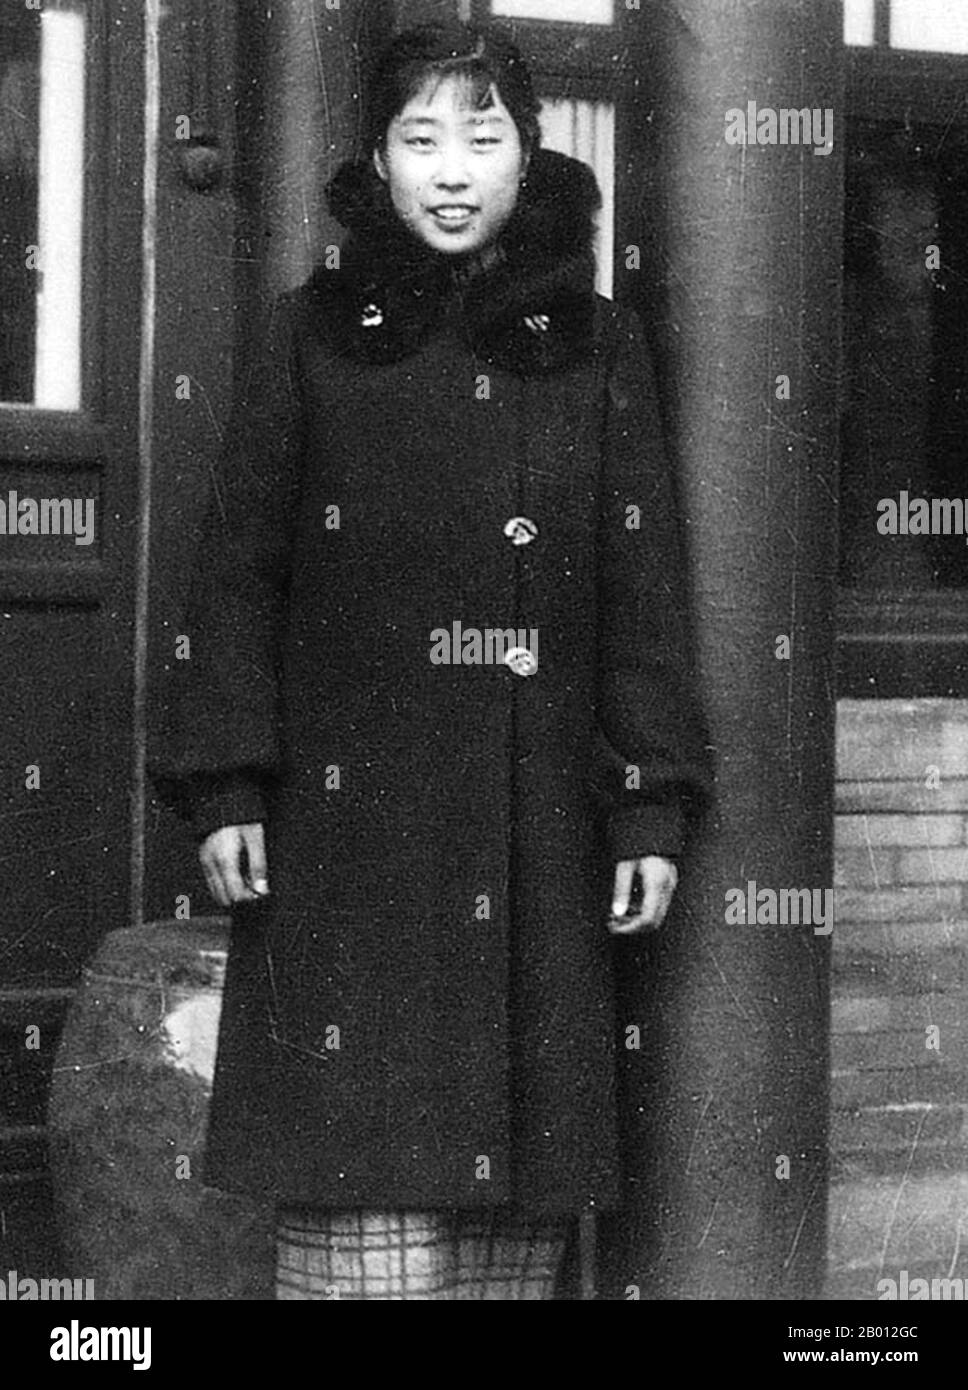 China: A young Wang Guangmei (1921-2006), First Lady of the People's Republic of China (1959-1968).   Wang Guangmei (26 September 1921 - 13 October 2006) was a respected Chinese politician, philanthropist, and First Lady, the wife of Liu Shaoqi, who served as the President of the People's Republic from 1959-1968. Stock Photo